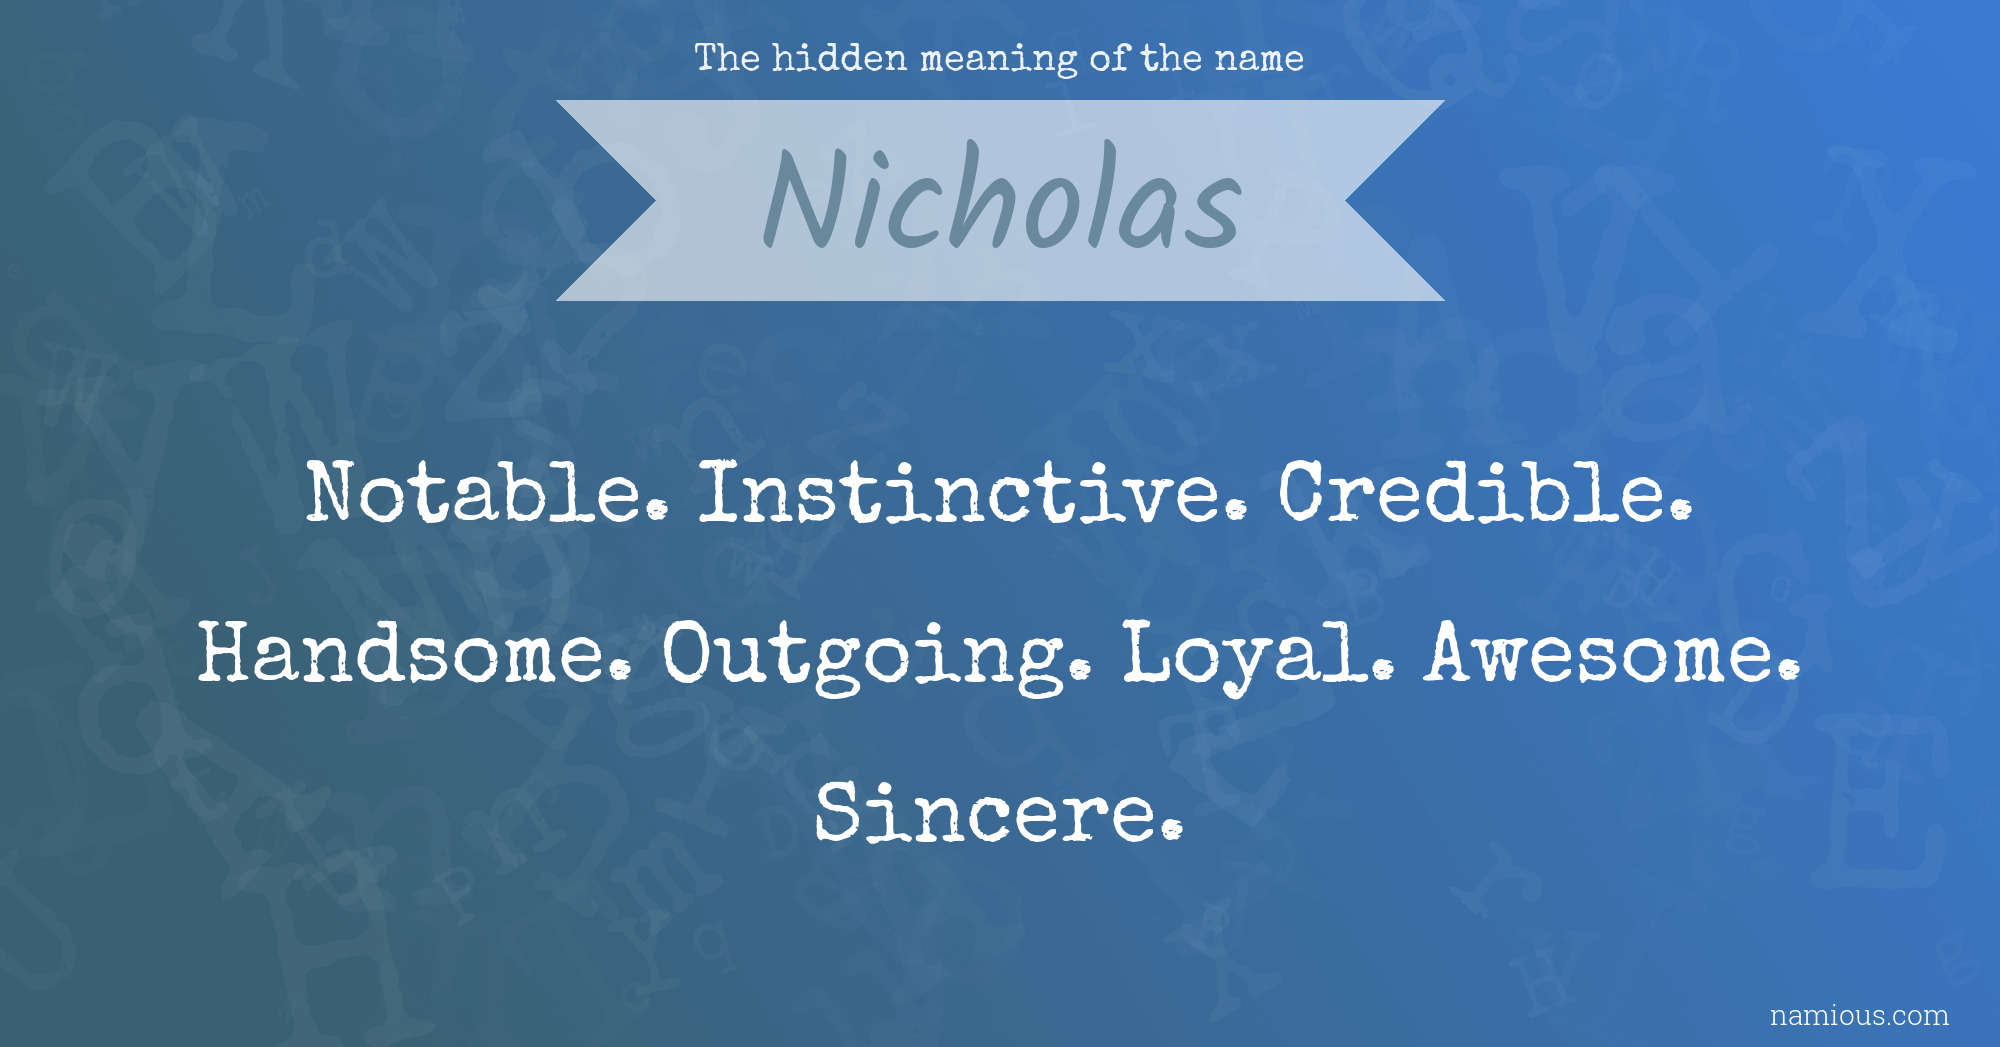 The hidden meaning of the name Nicholas